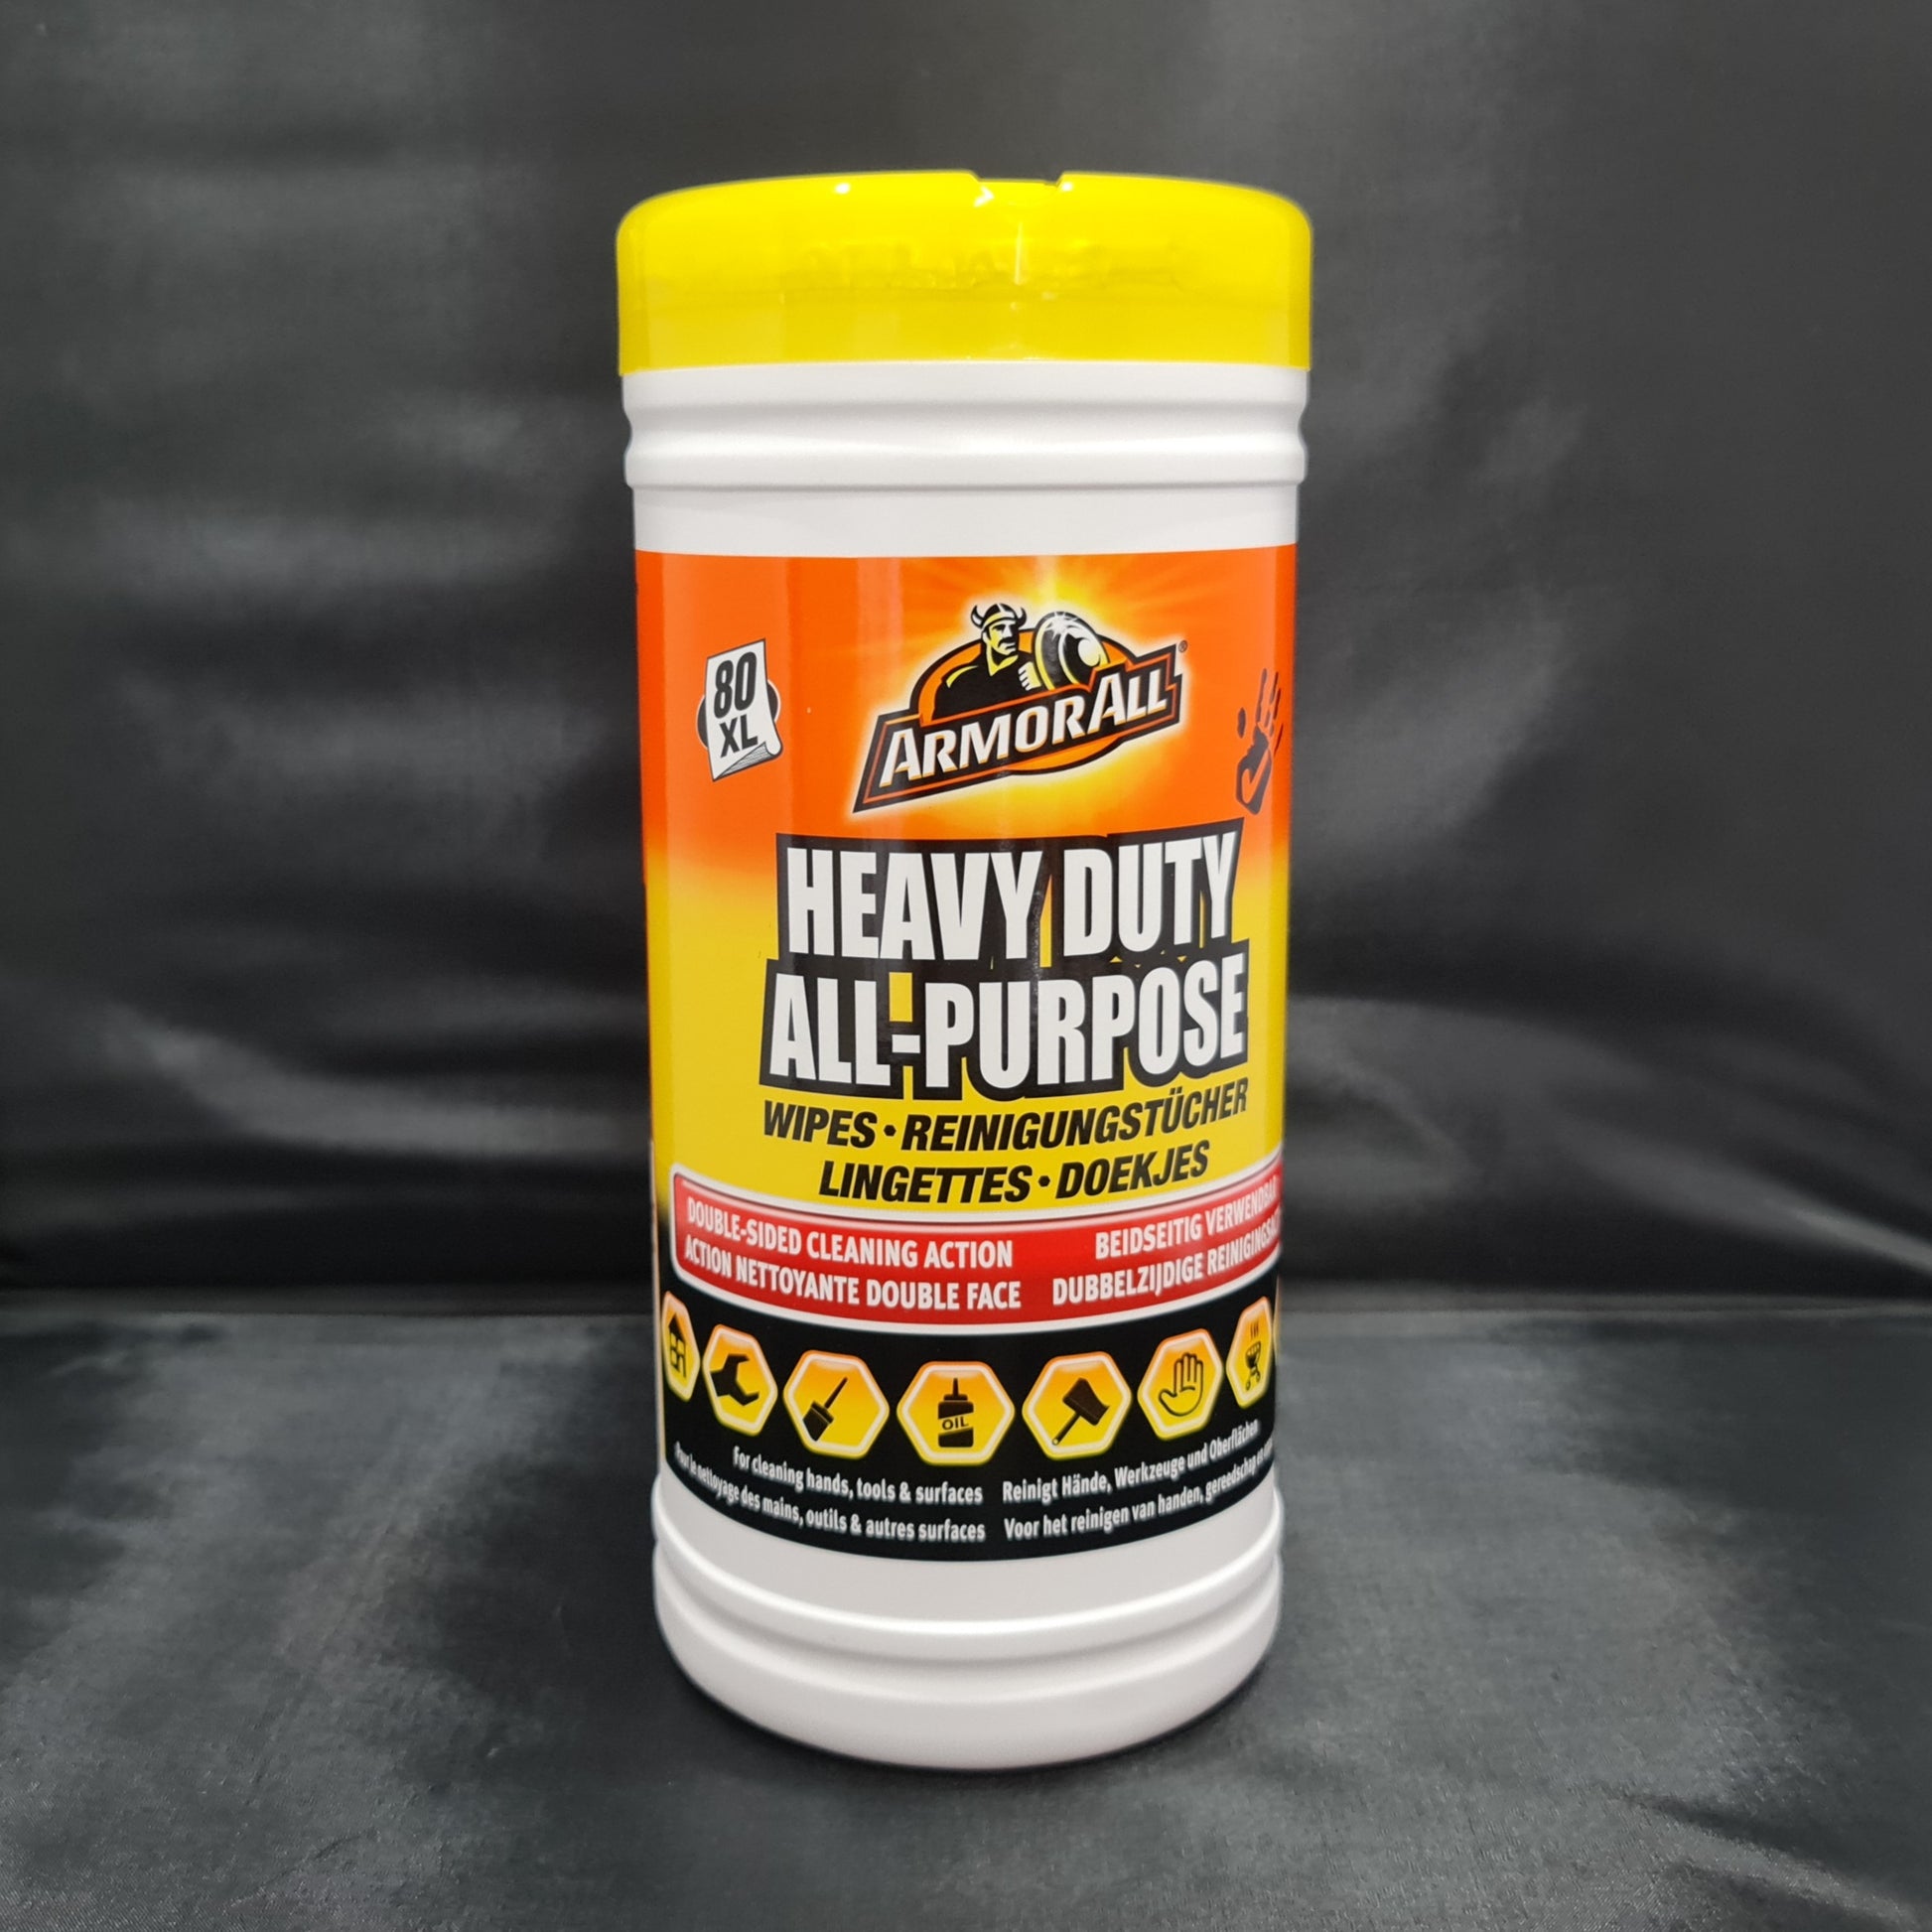 ArmorAll heavy duty all purpose wipes